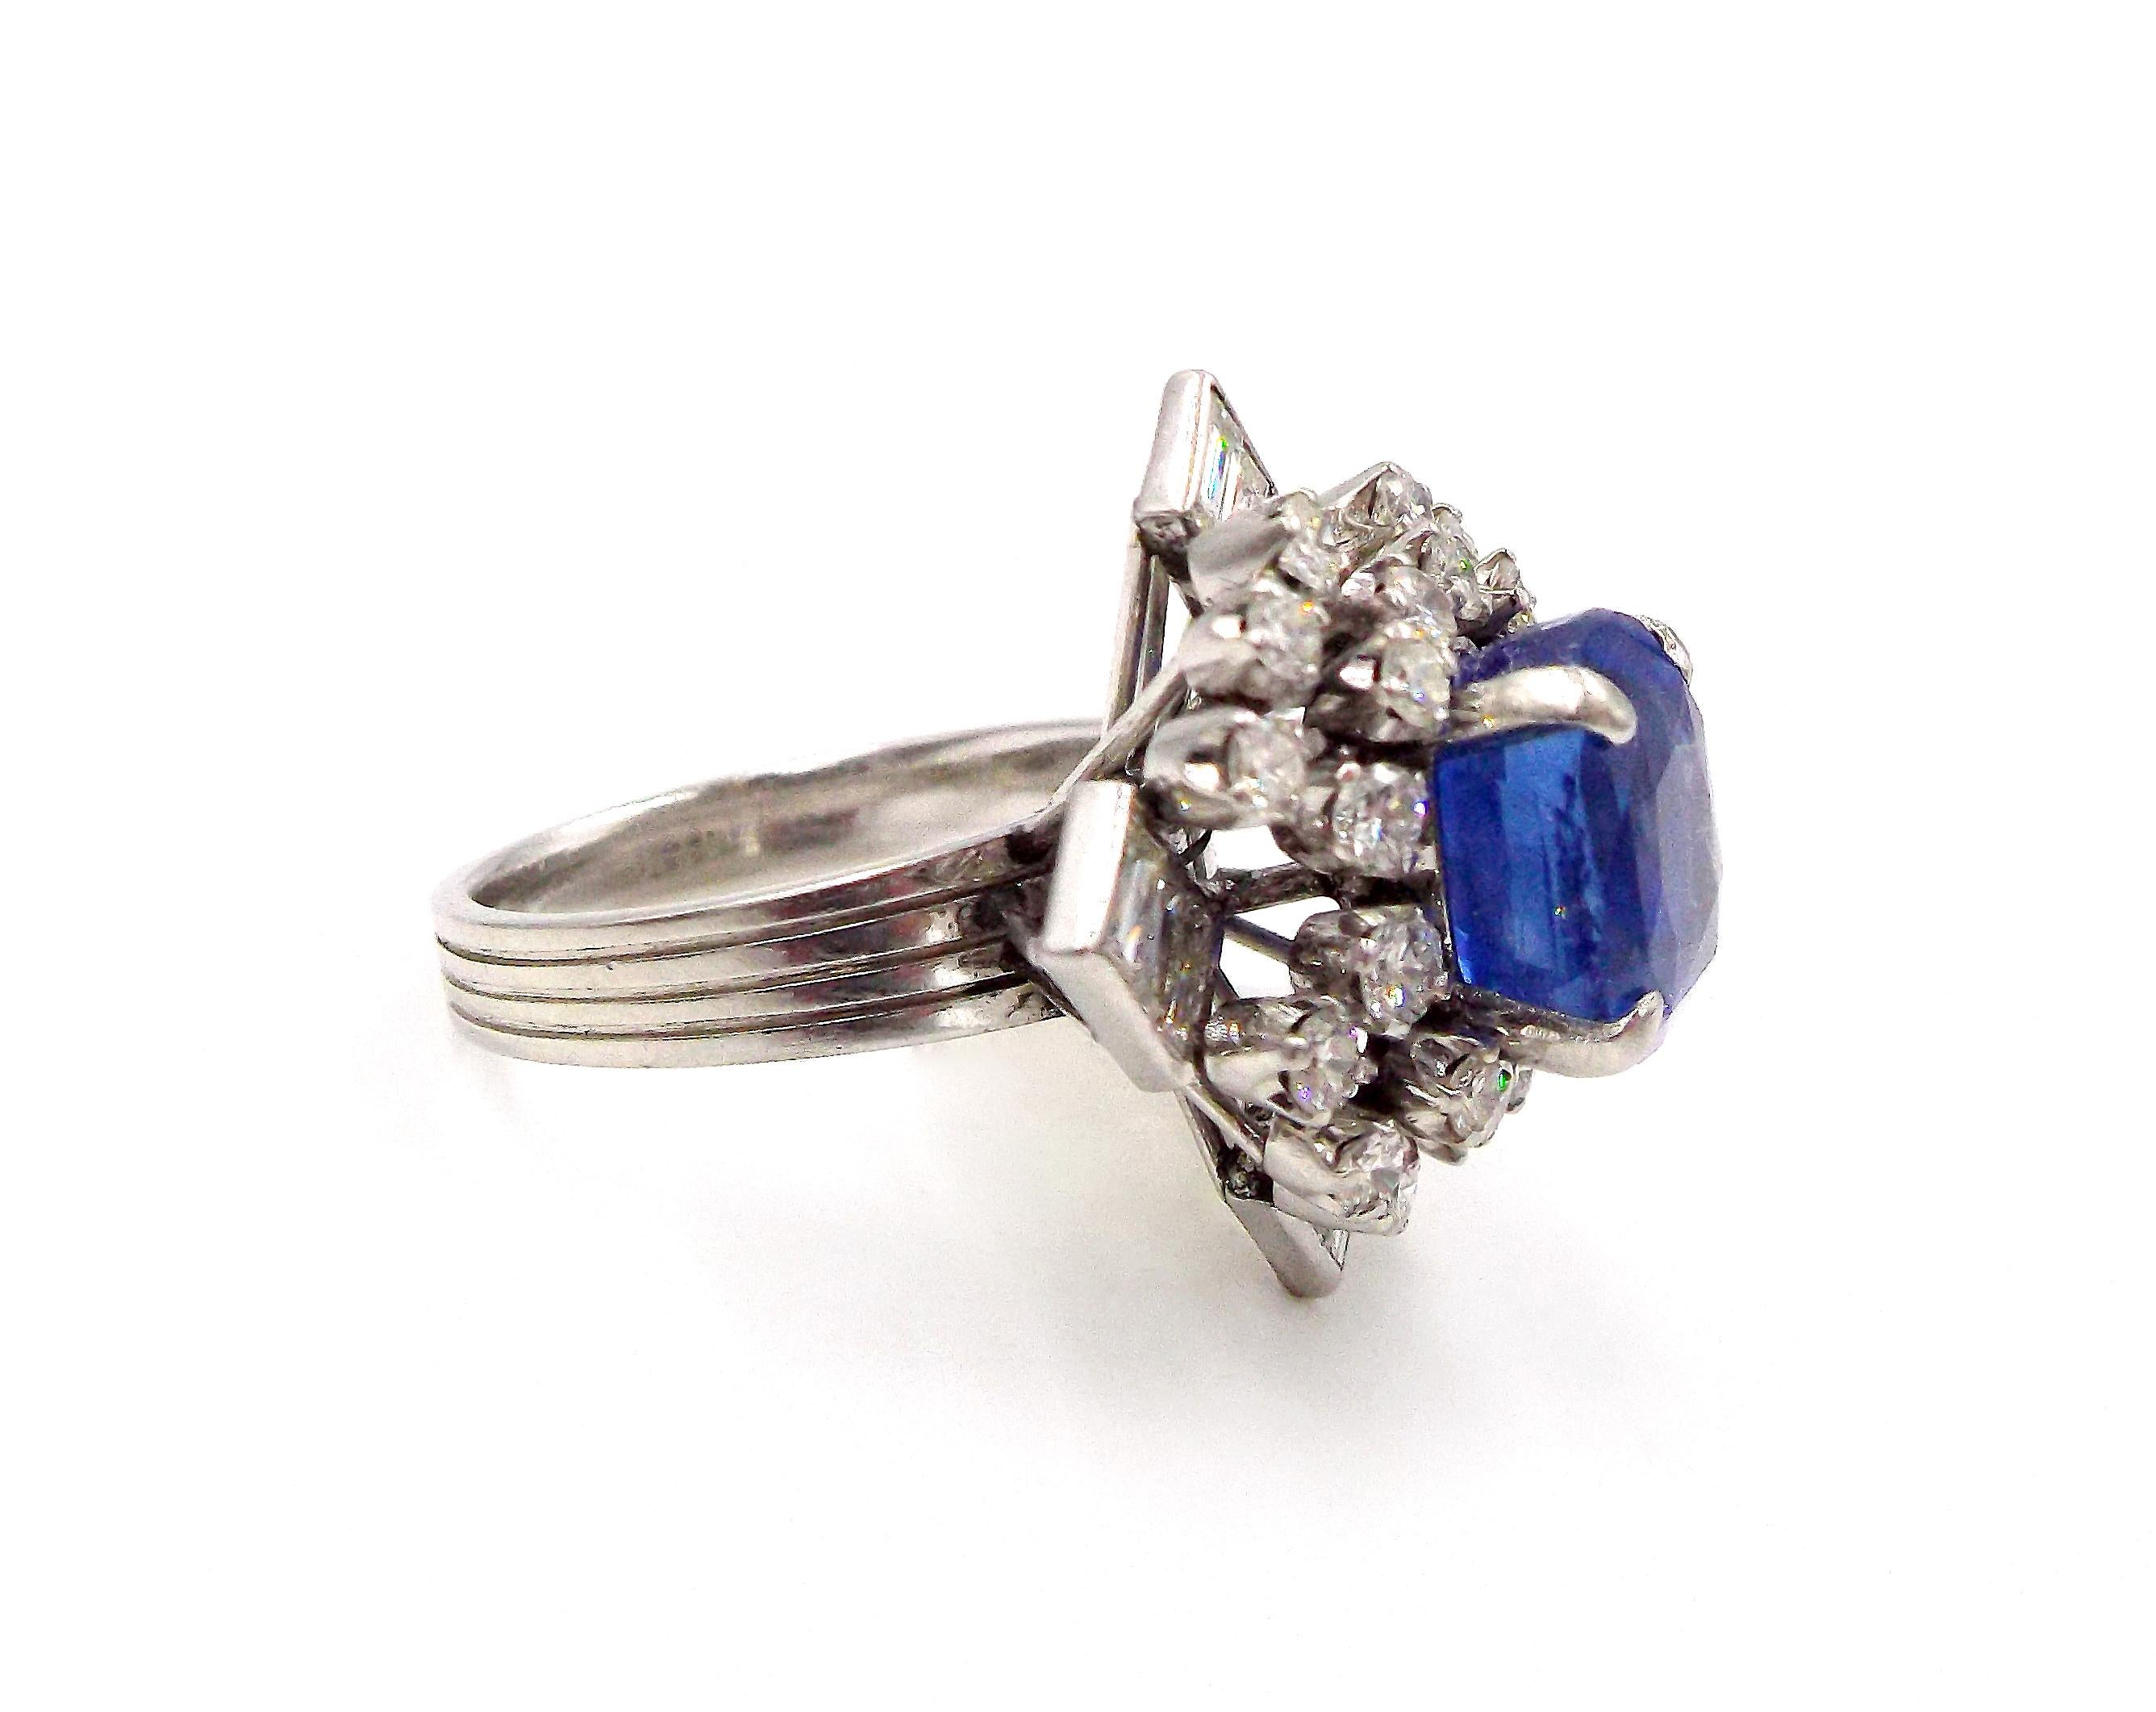 Centering one cushion-shaped sapphire 6.46 cts., within a square-shaped mount of 24 round and 12 baguette diamonds 2.20 cts., 8.6 dwts. Size 7. 
With AGL report no. 1092785 stating that the sapphire is of Ceylon (Sri Lanka) origin, with no